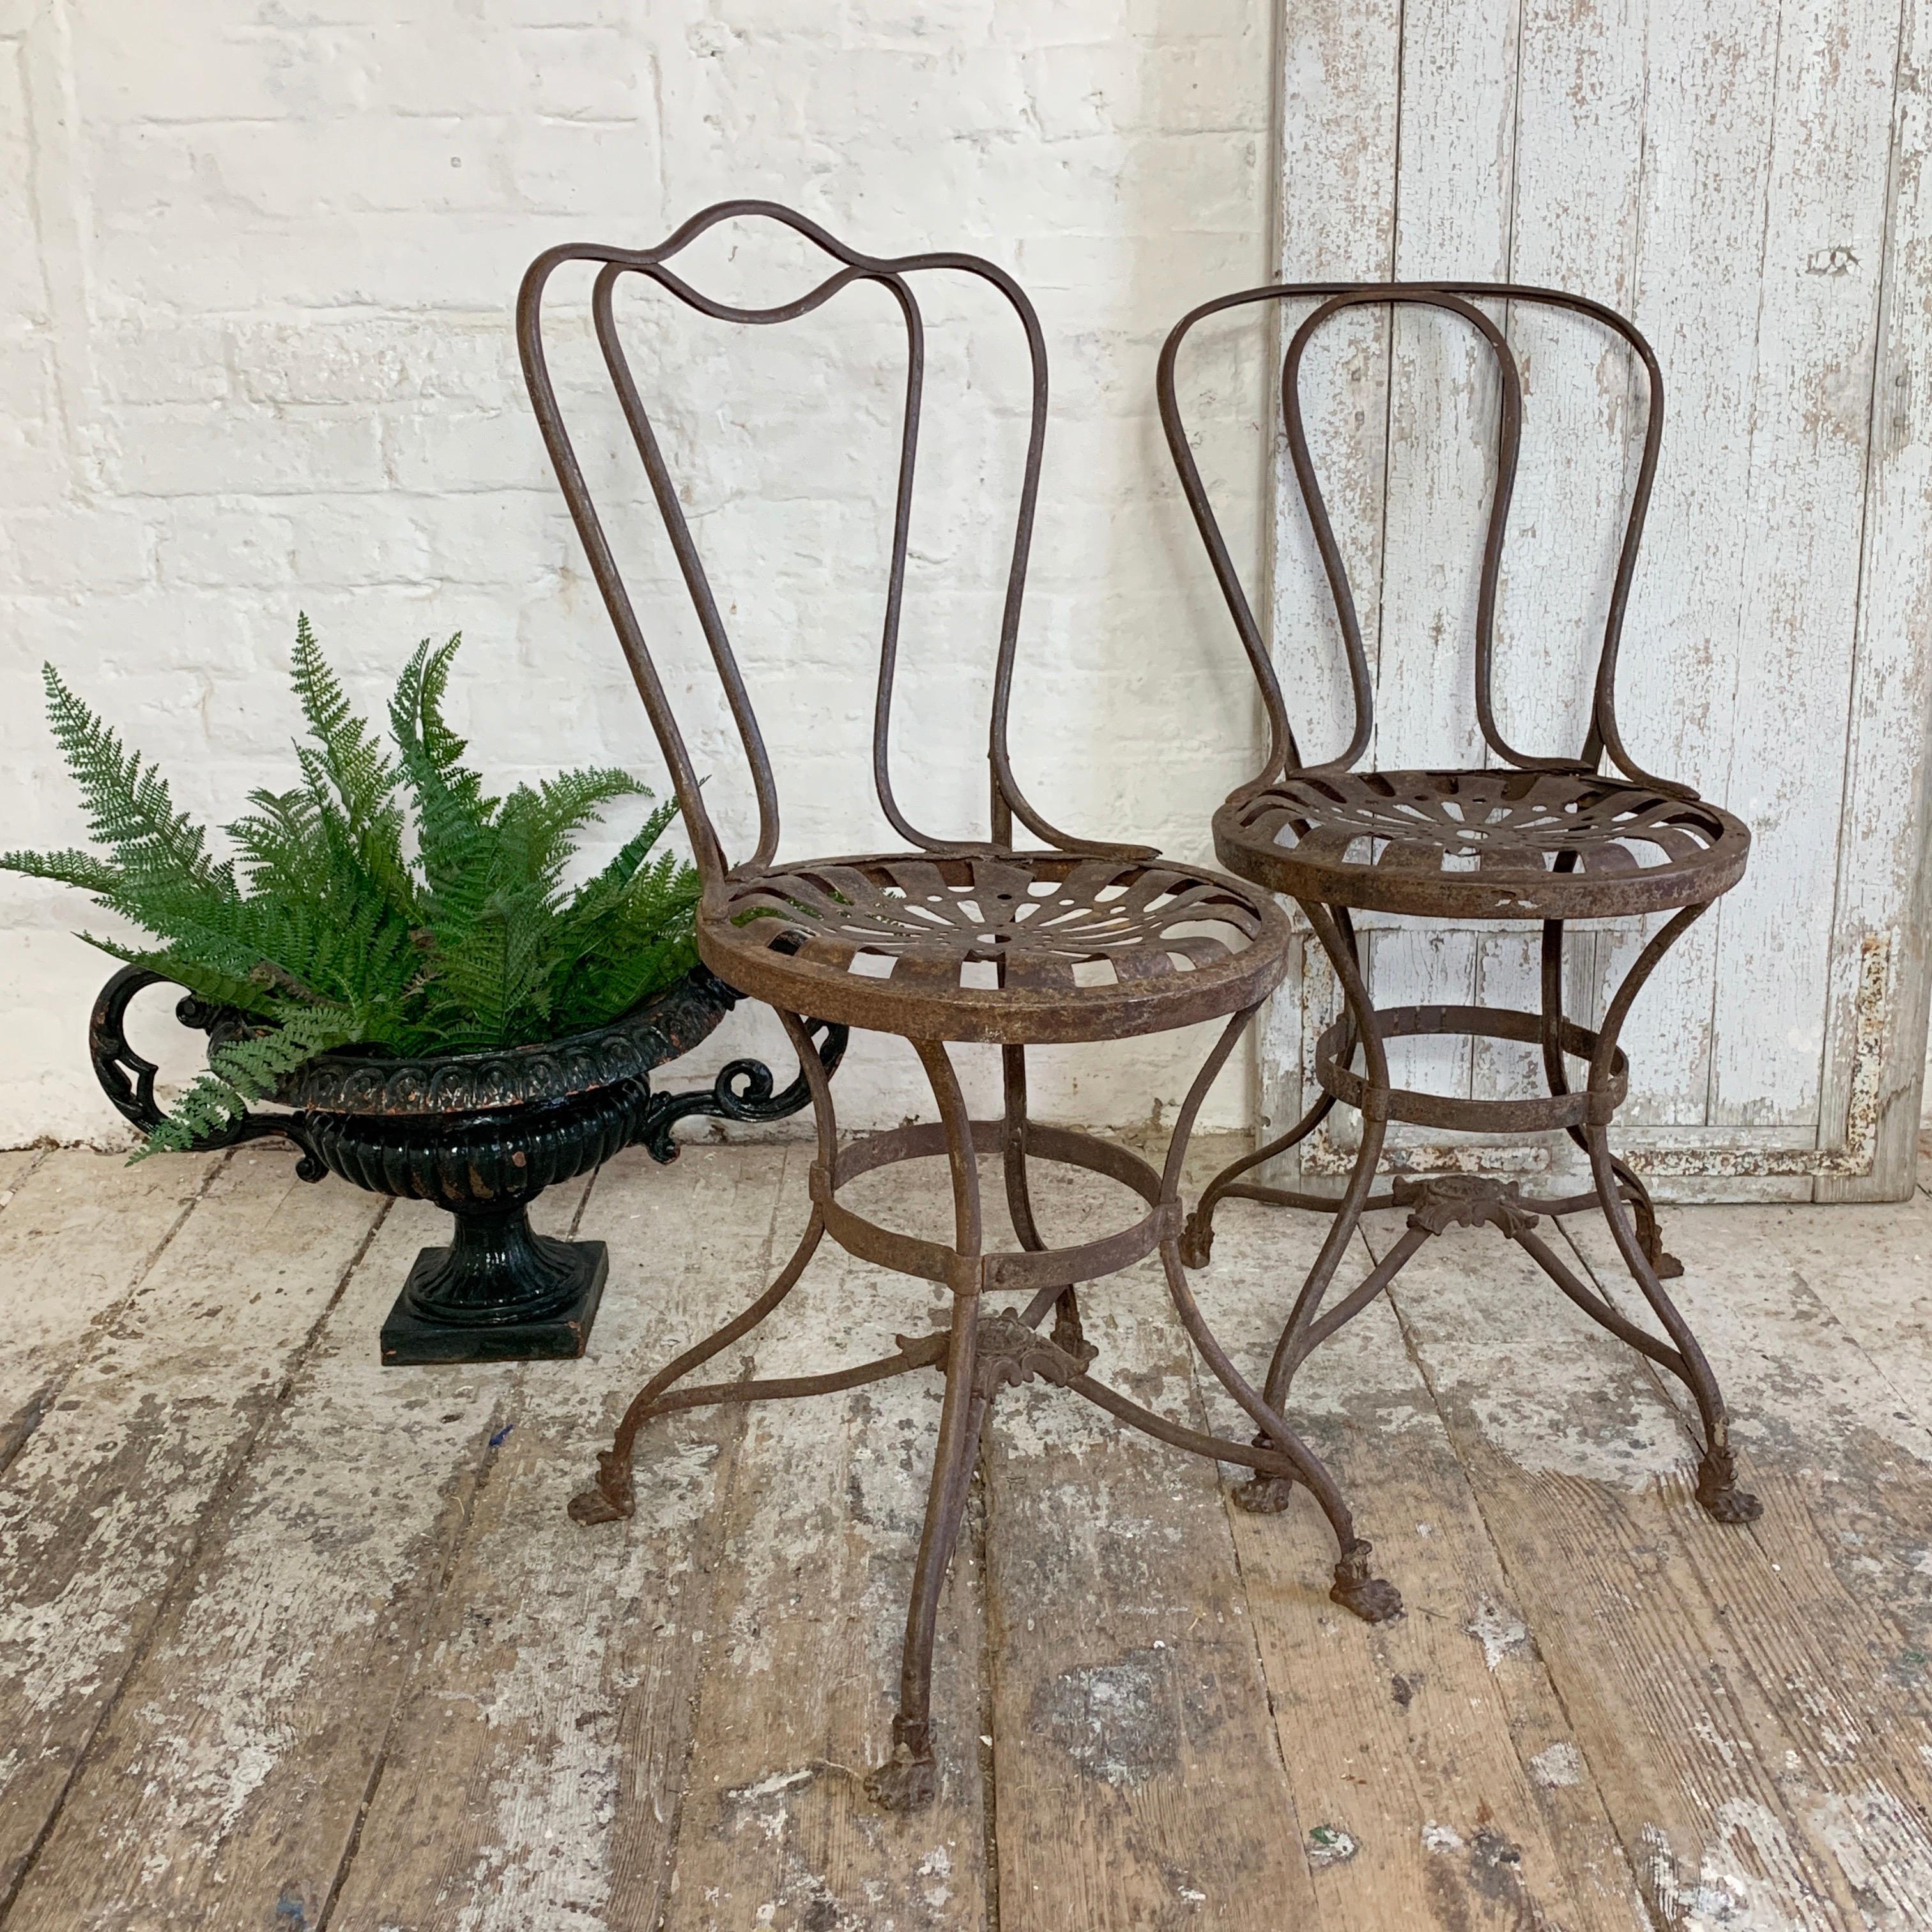 Hand-Crafted Late 19th Century French Grassin Arras Garden Chairs